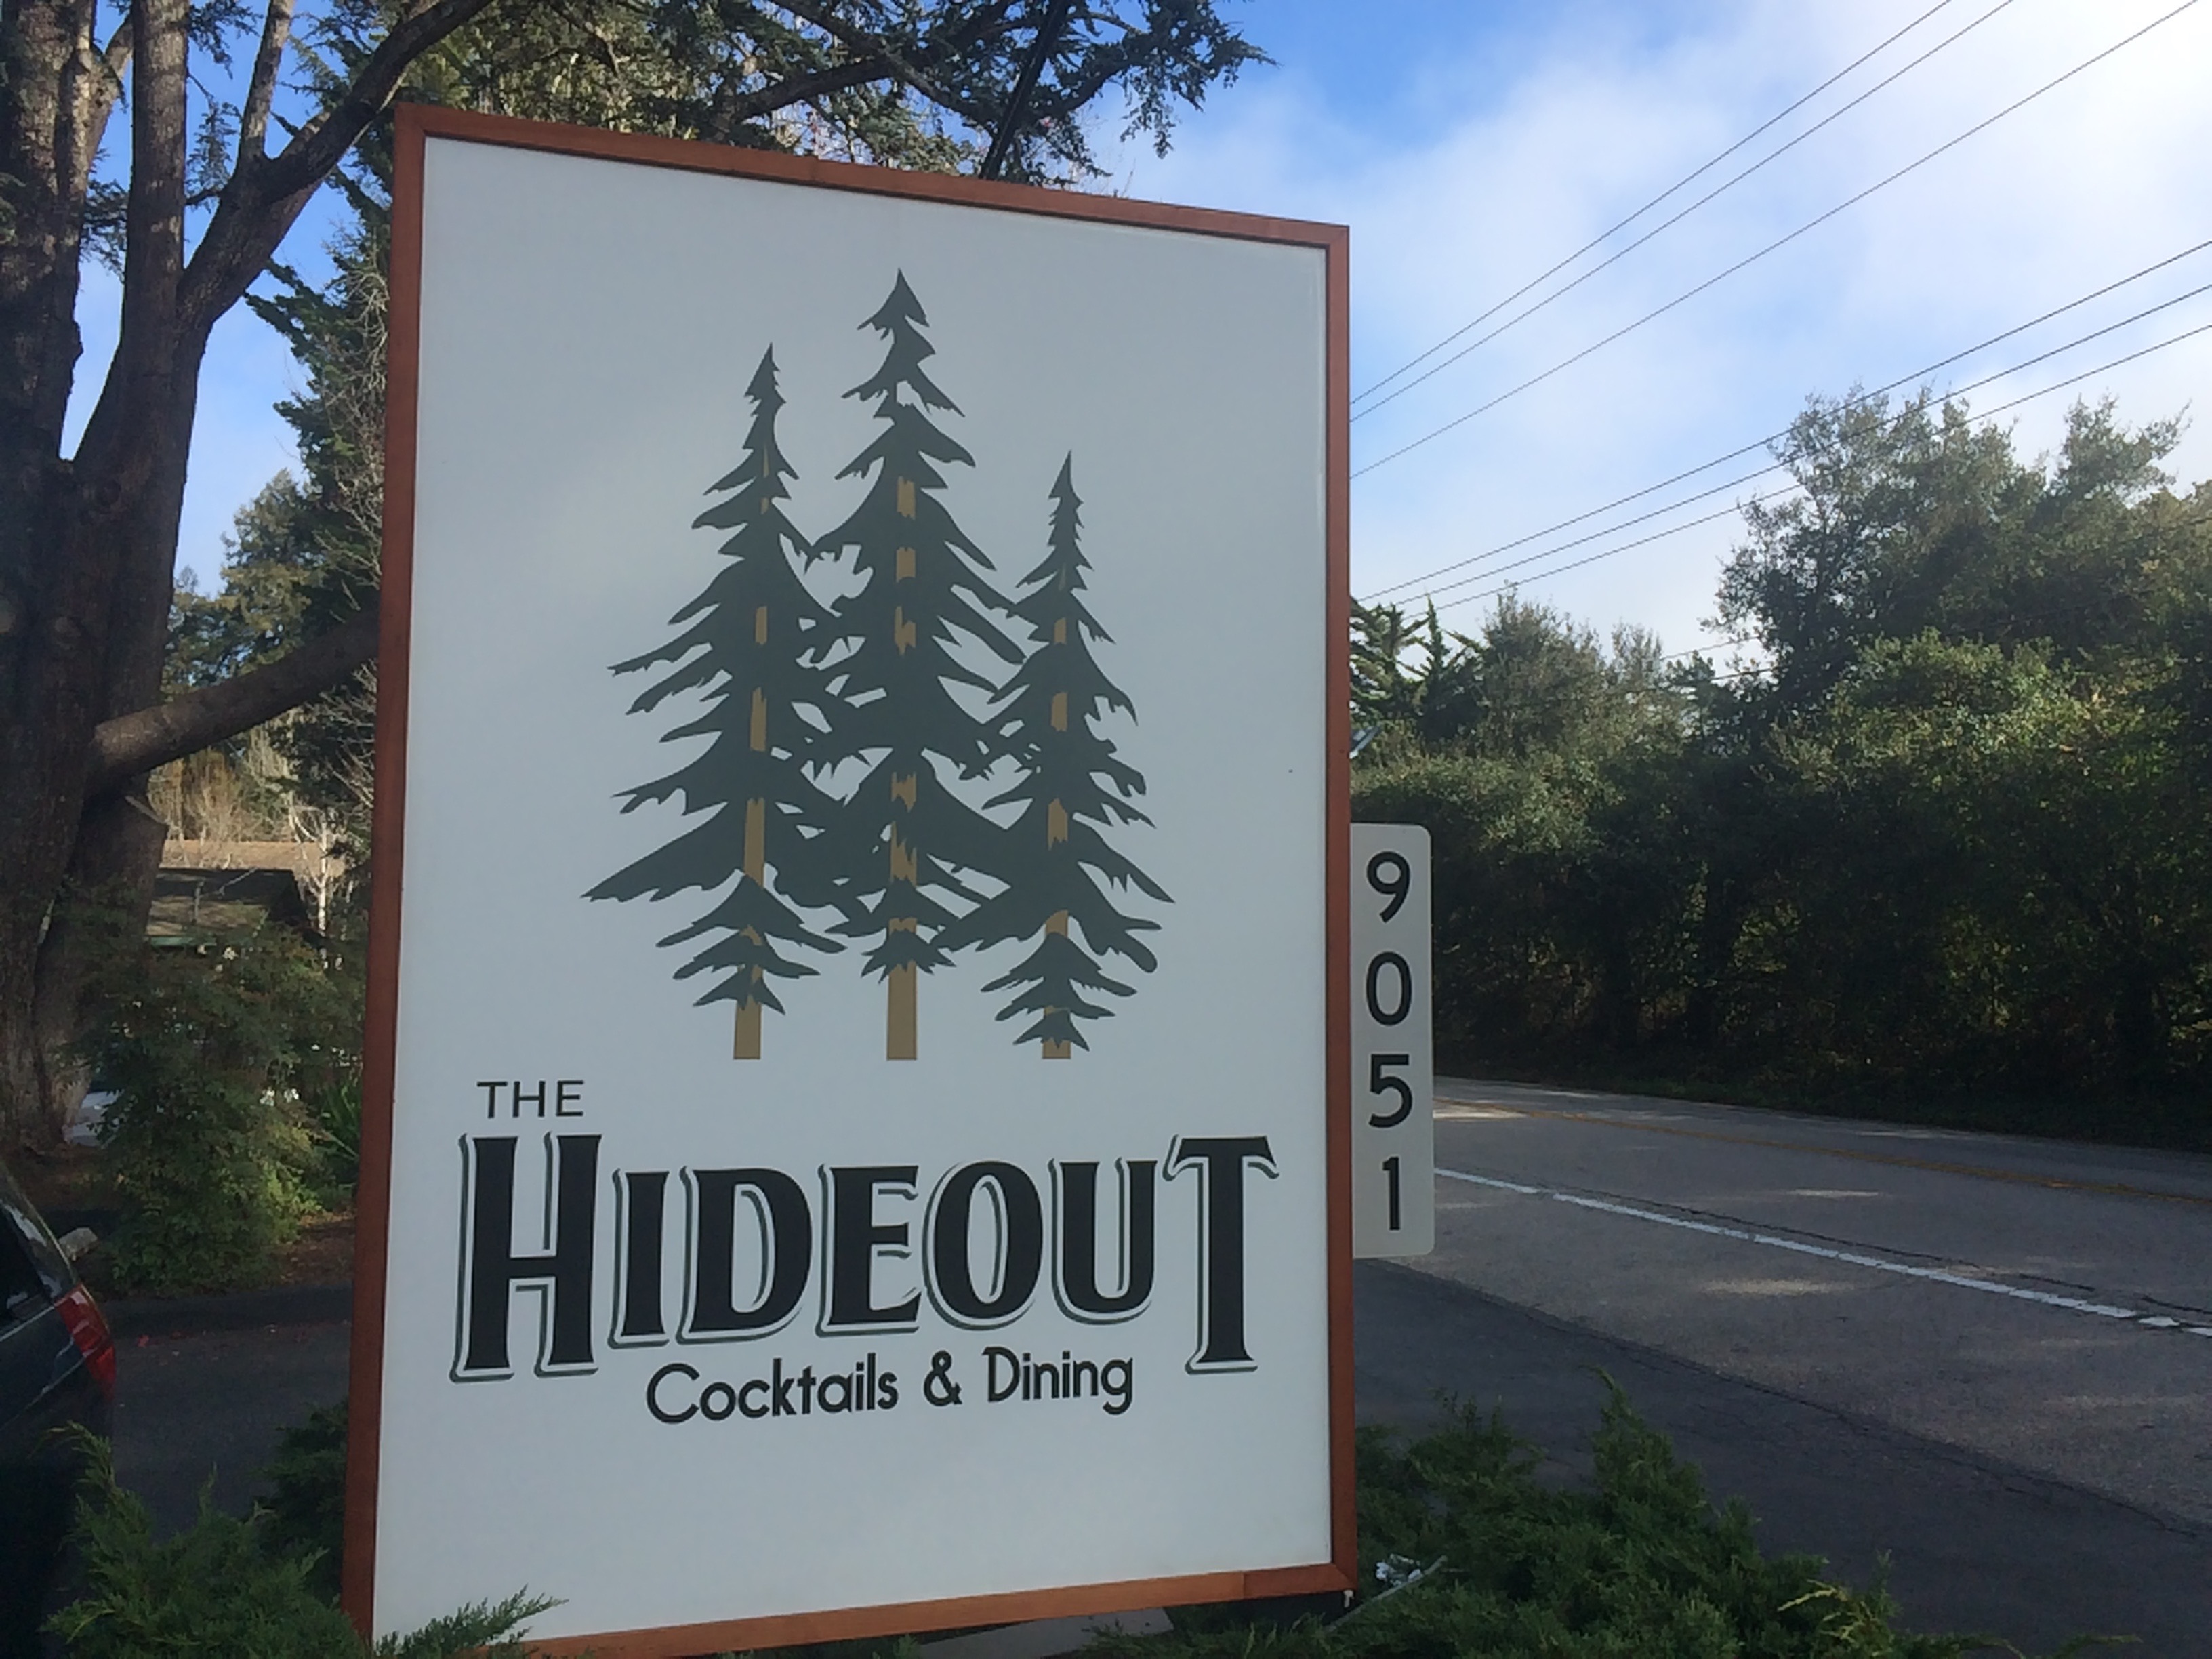 The Hideout in Aptos on Soquel Drive